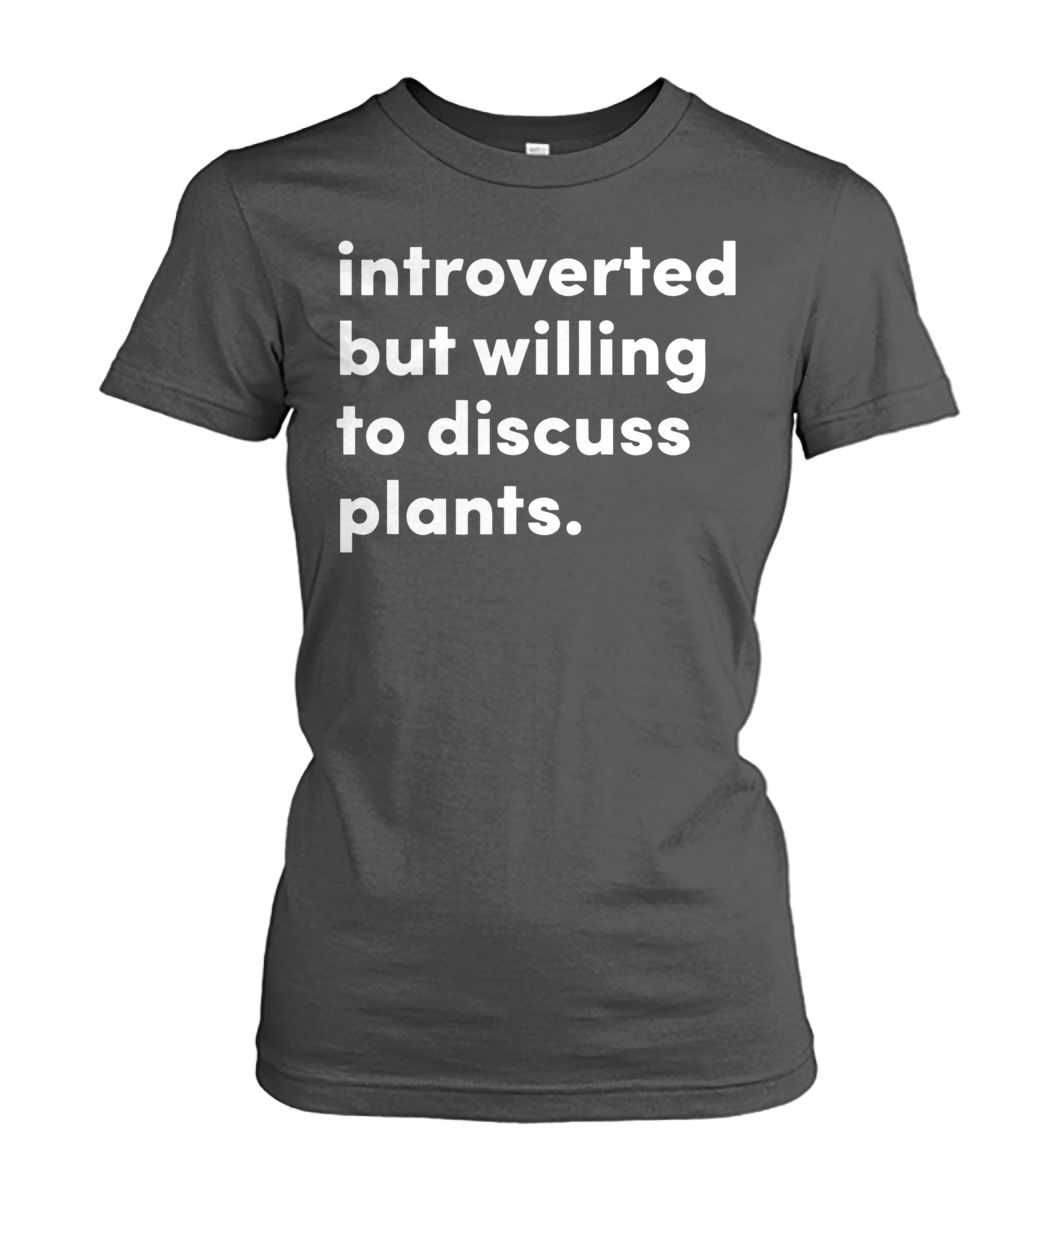 Introverted but willing to discuss plants women's crew tee